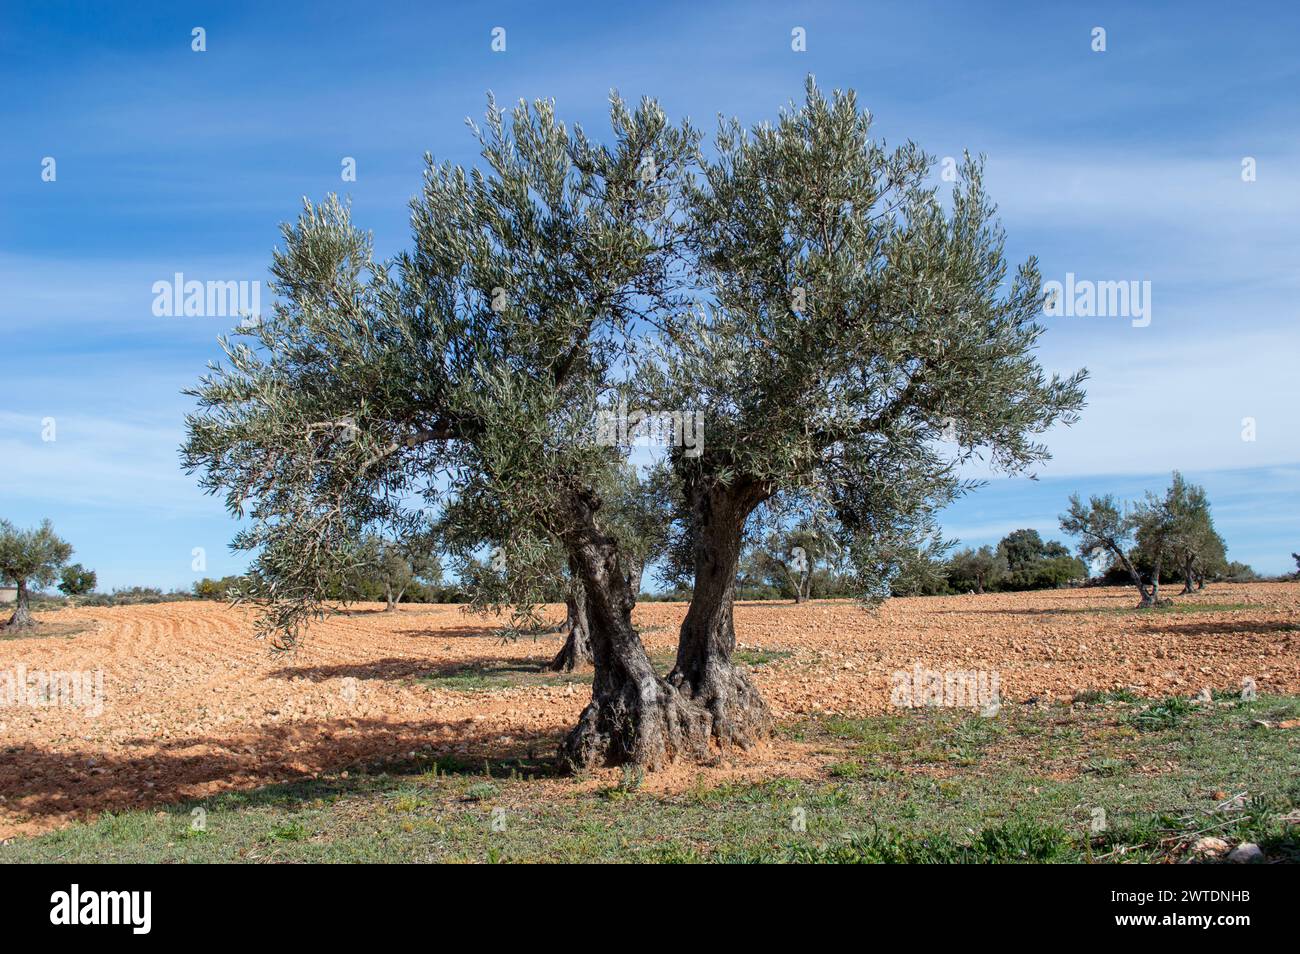 Olive grove landscape with ancient olive trees in Spain Stock Photo